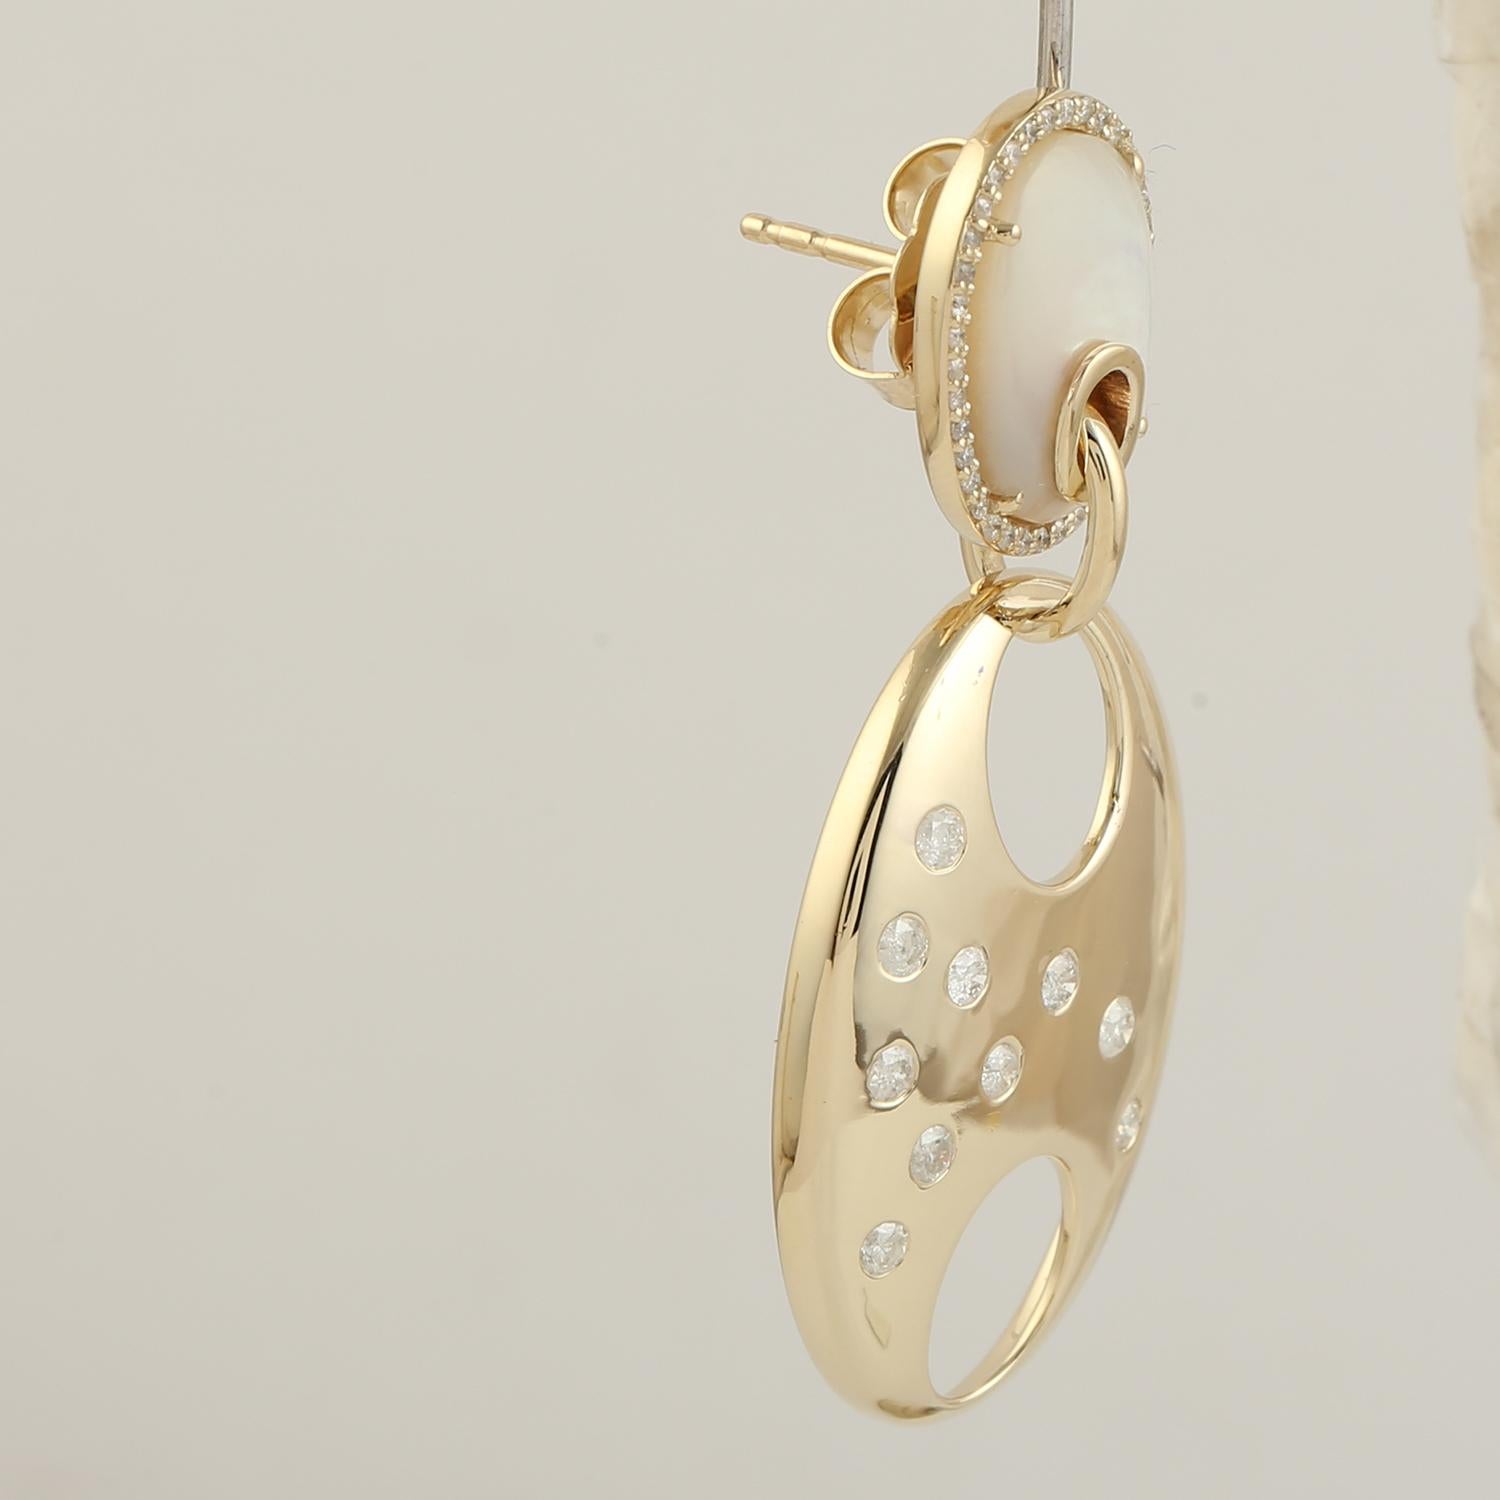 Contemporary Pave Diamond & Mother Of Pearl Dangle Earrings Made In 14k Gold For Sale